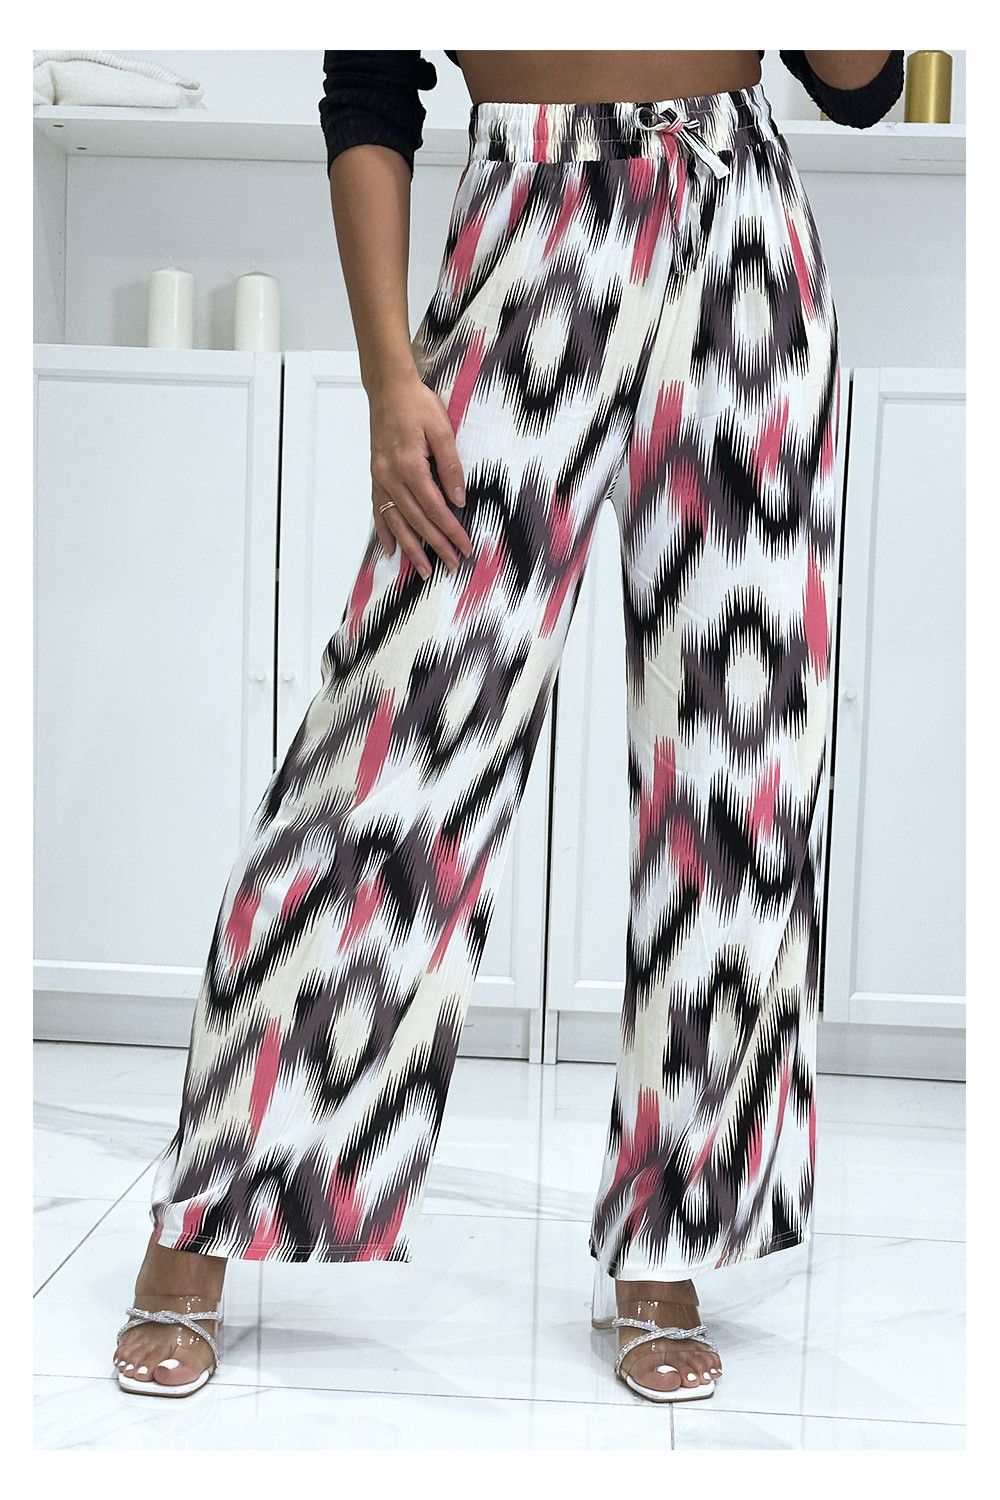 Black and pink palazzo pants with pretty colorful pattern